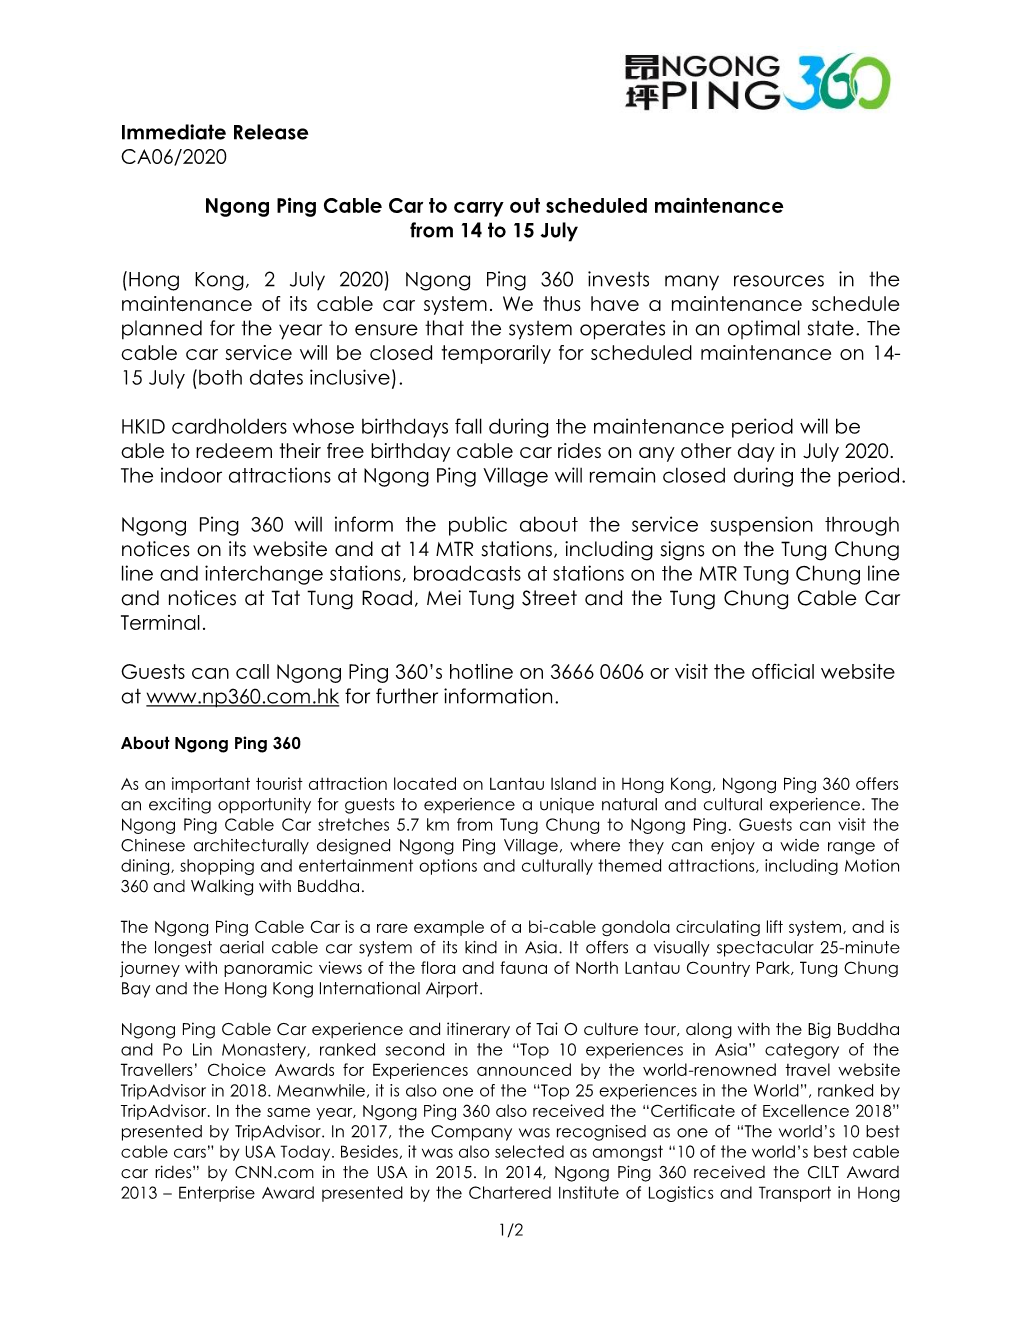 Immediate Release CA06/2020 Ngong Ping Cable Car to Carry Out